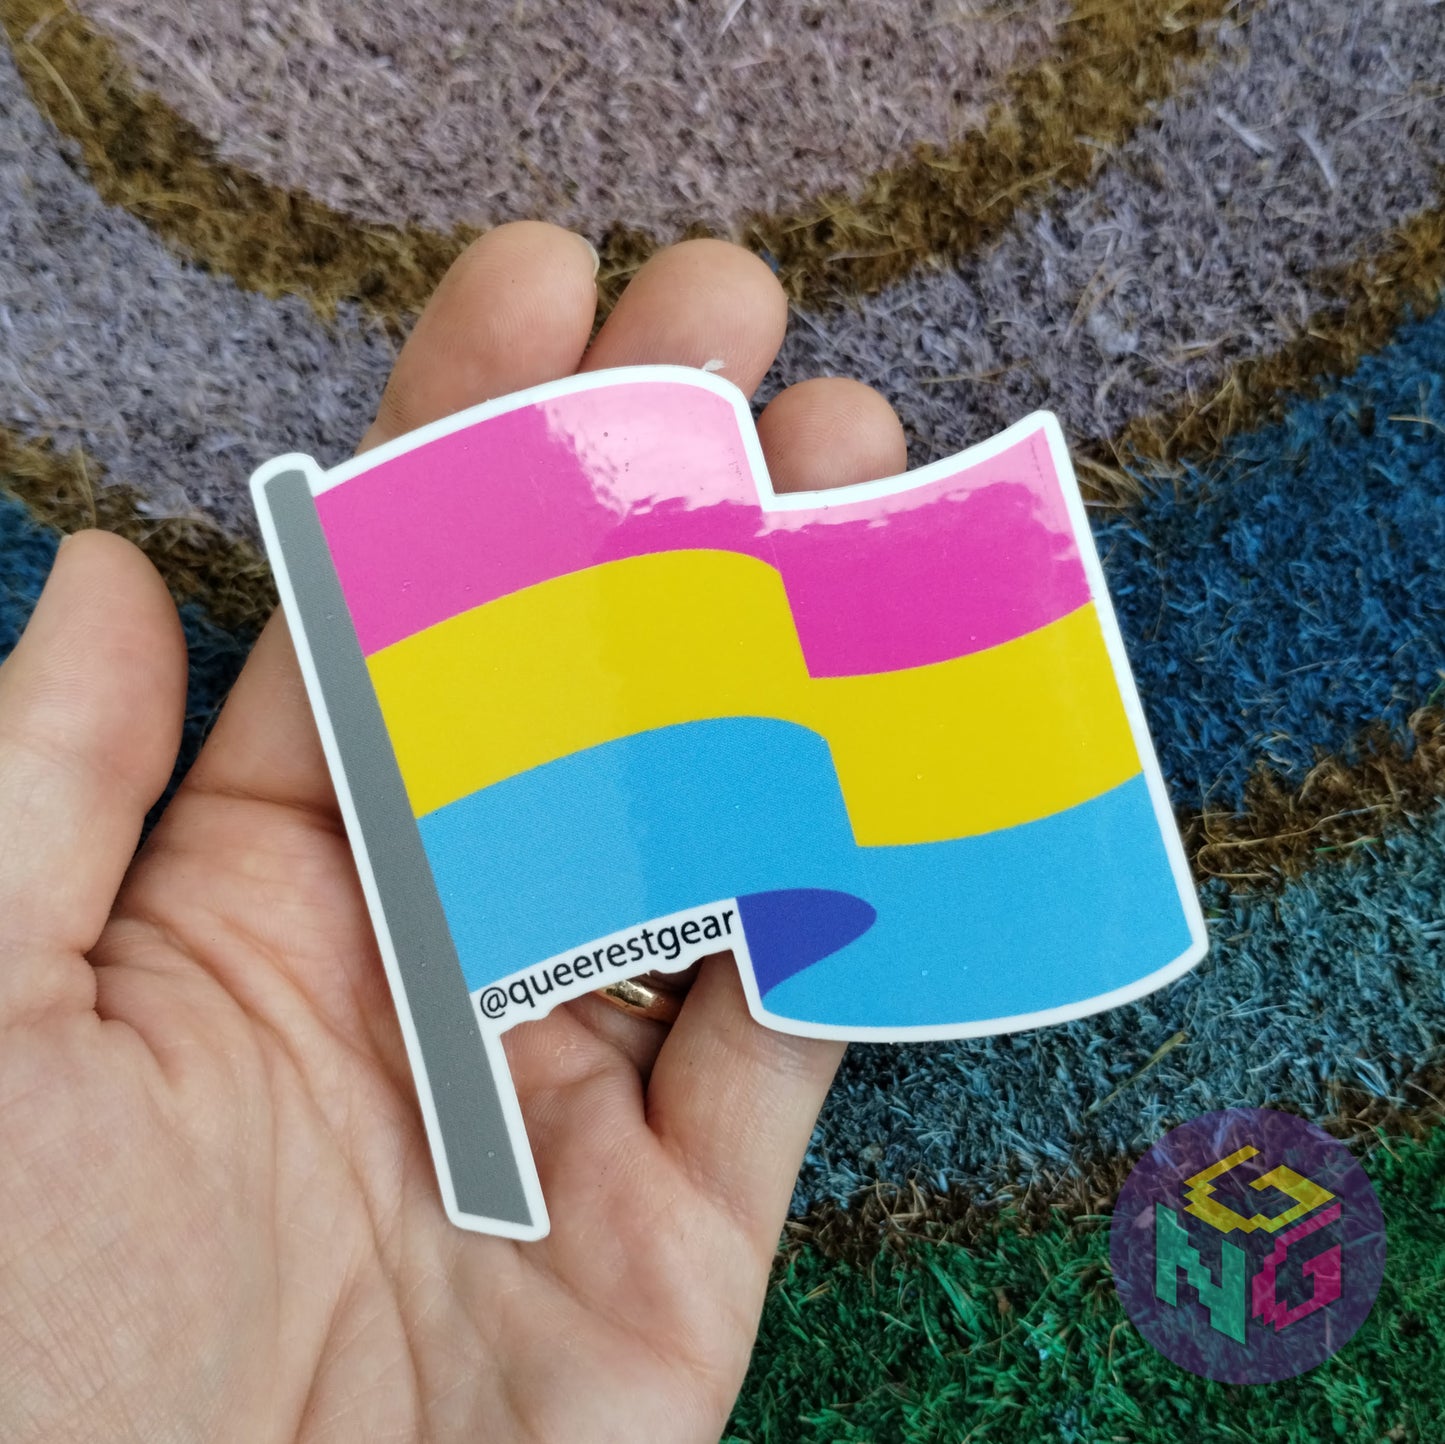 pansexual flag sticker held in hand against rainbow welcome mat